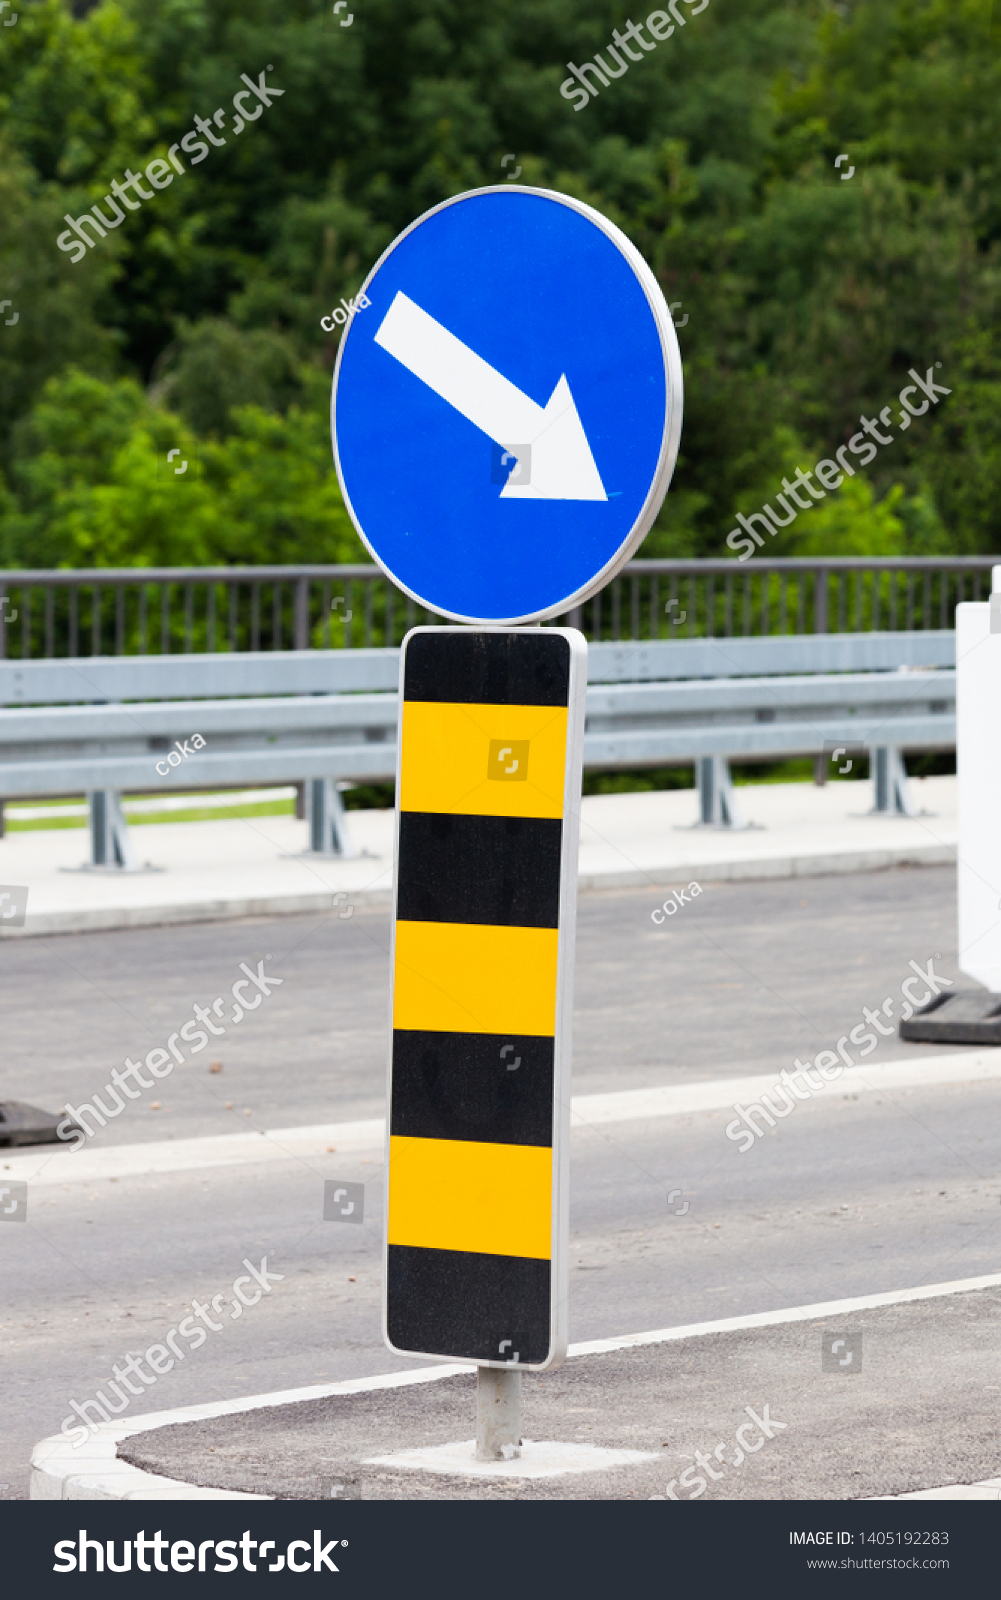  notification sign  changes direction of movement due to works on road  #1405192283